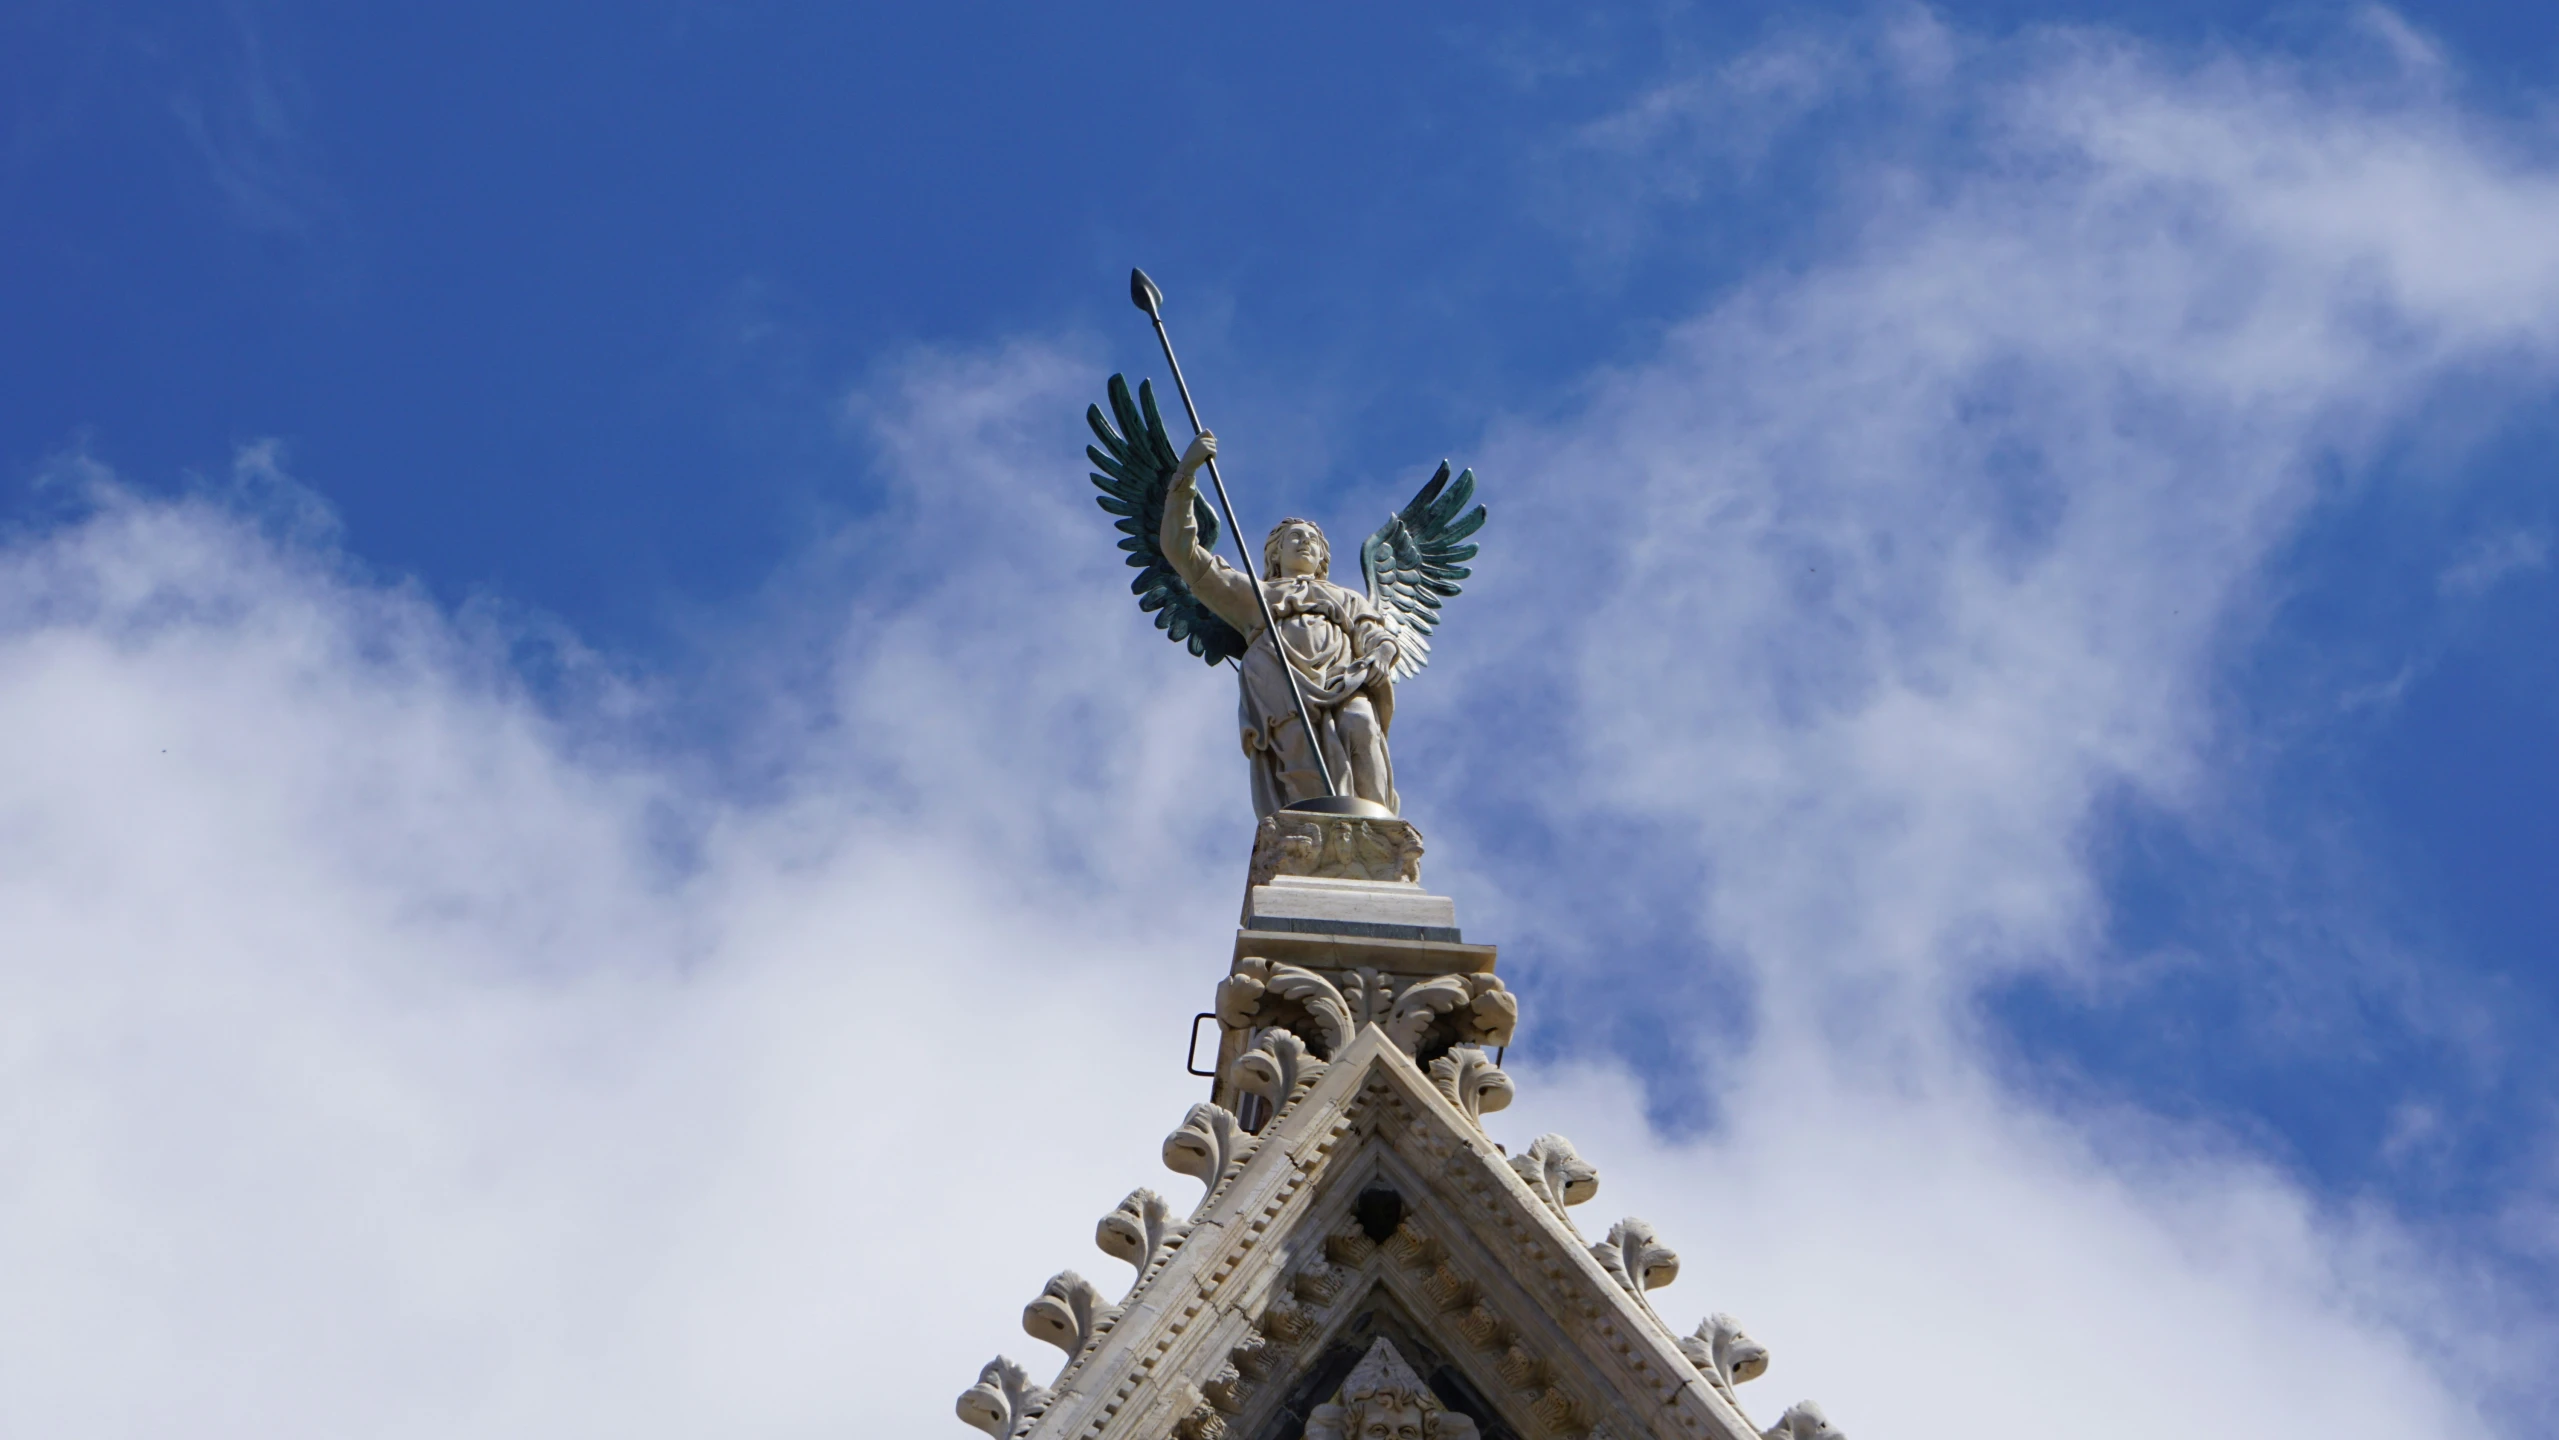 a tall statue on top of a tower